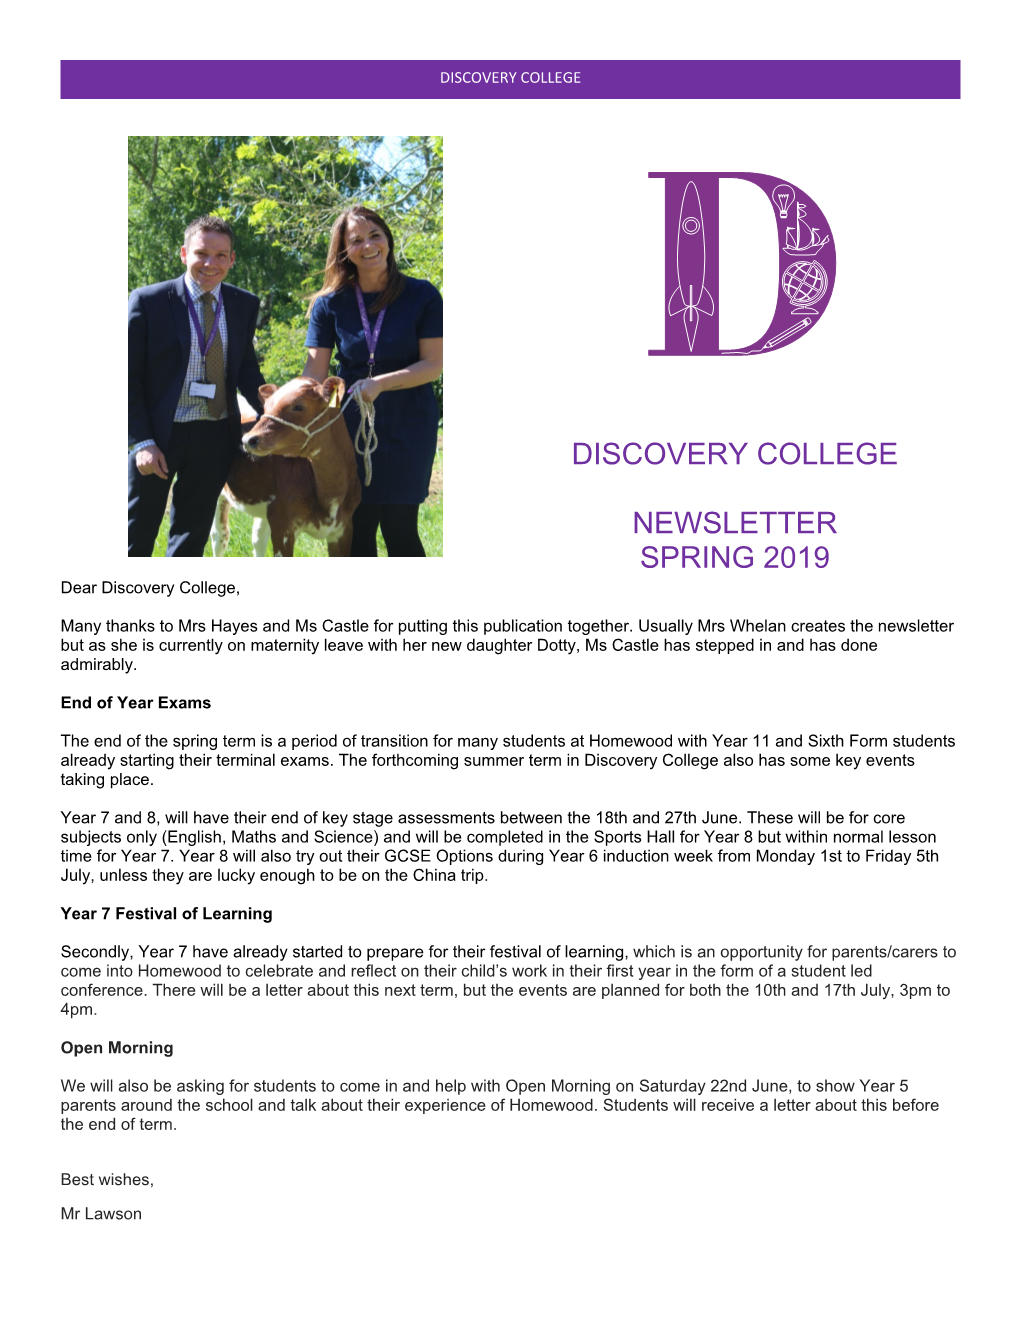 Discovery College Newsletter Spring 2019